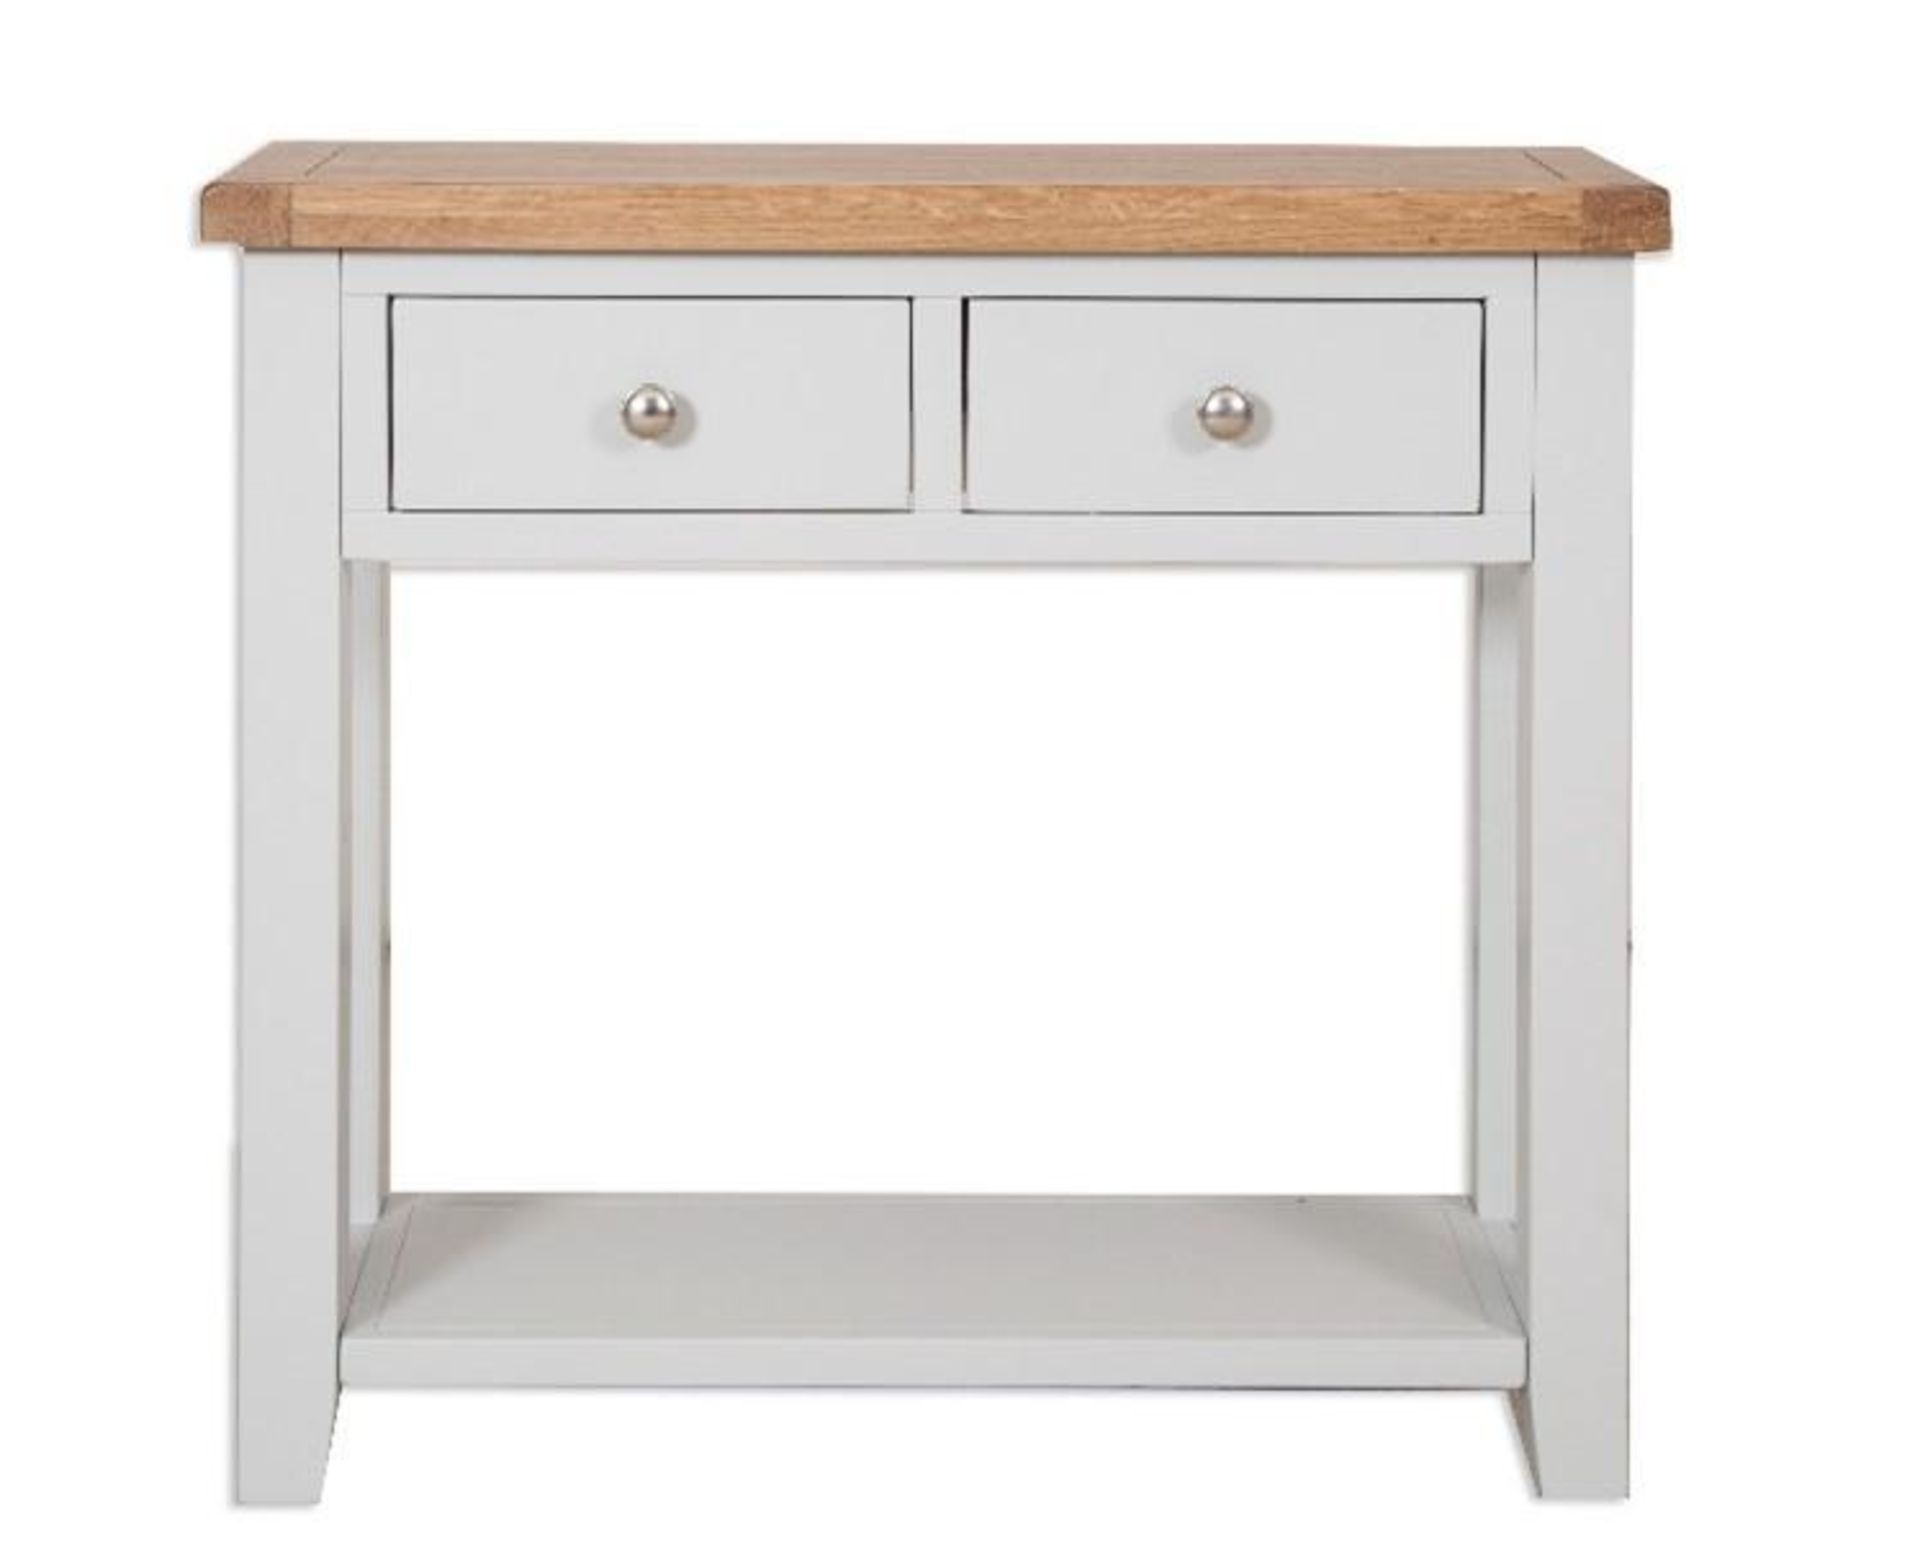 *BRAND NEW* Melbourne french grey and oak top 2 drawer console table. RRP: £260